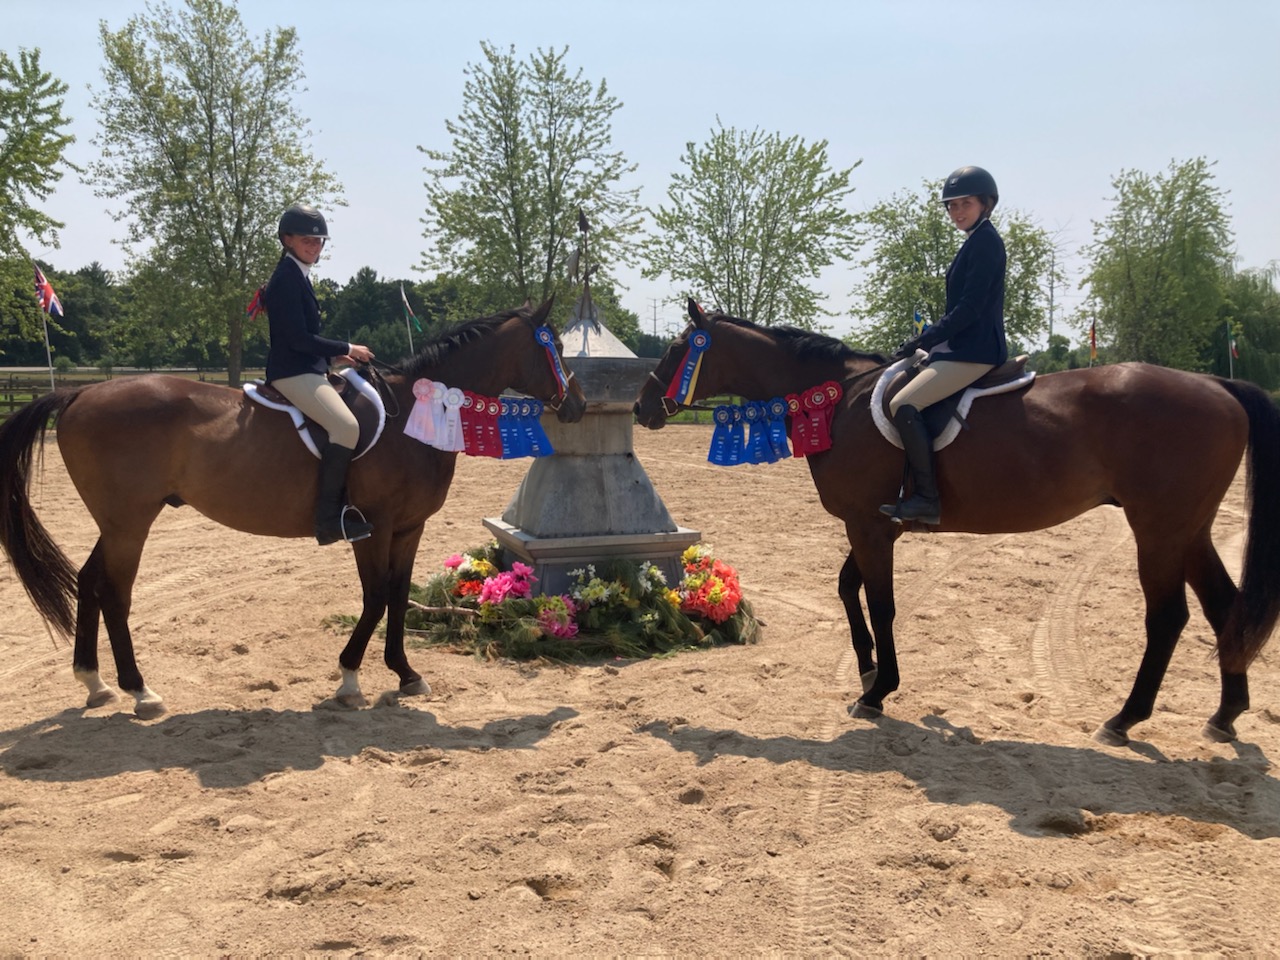 Two riders in uniform posing on their horses with countless award ribbons